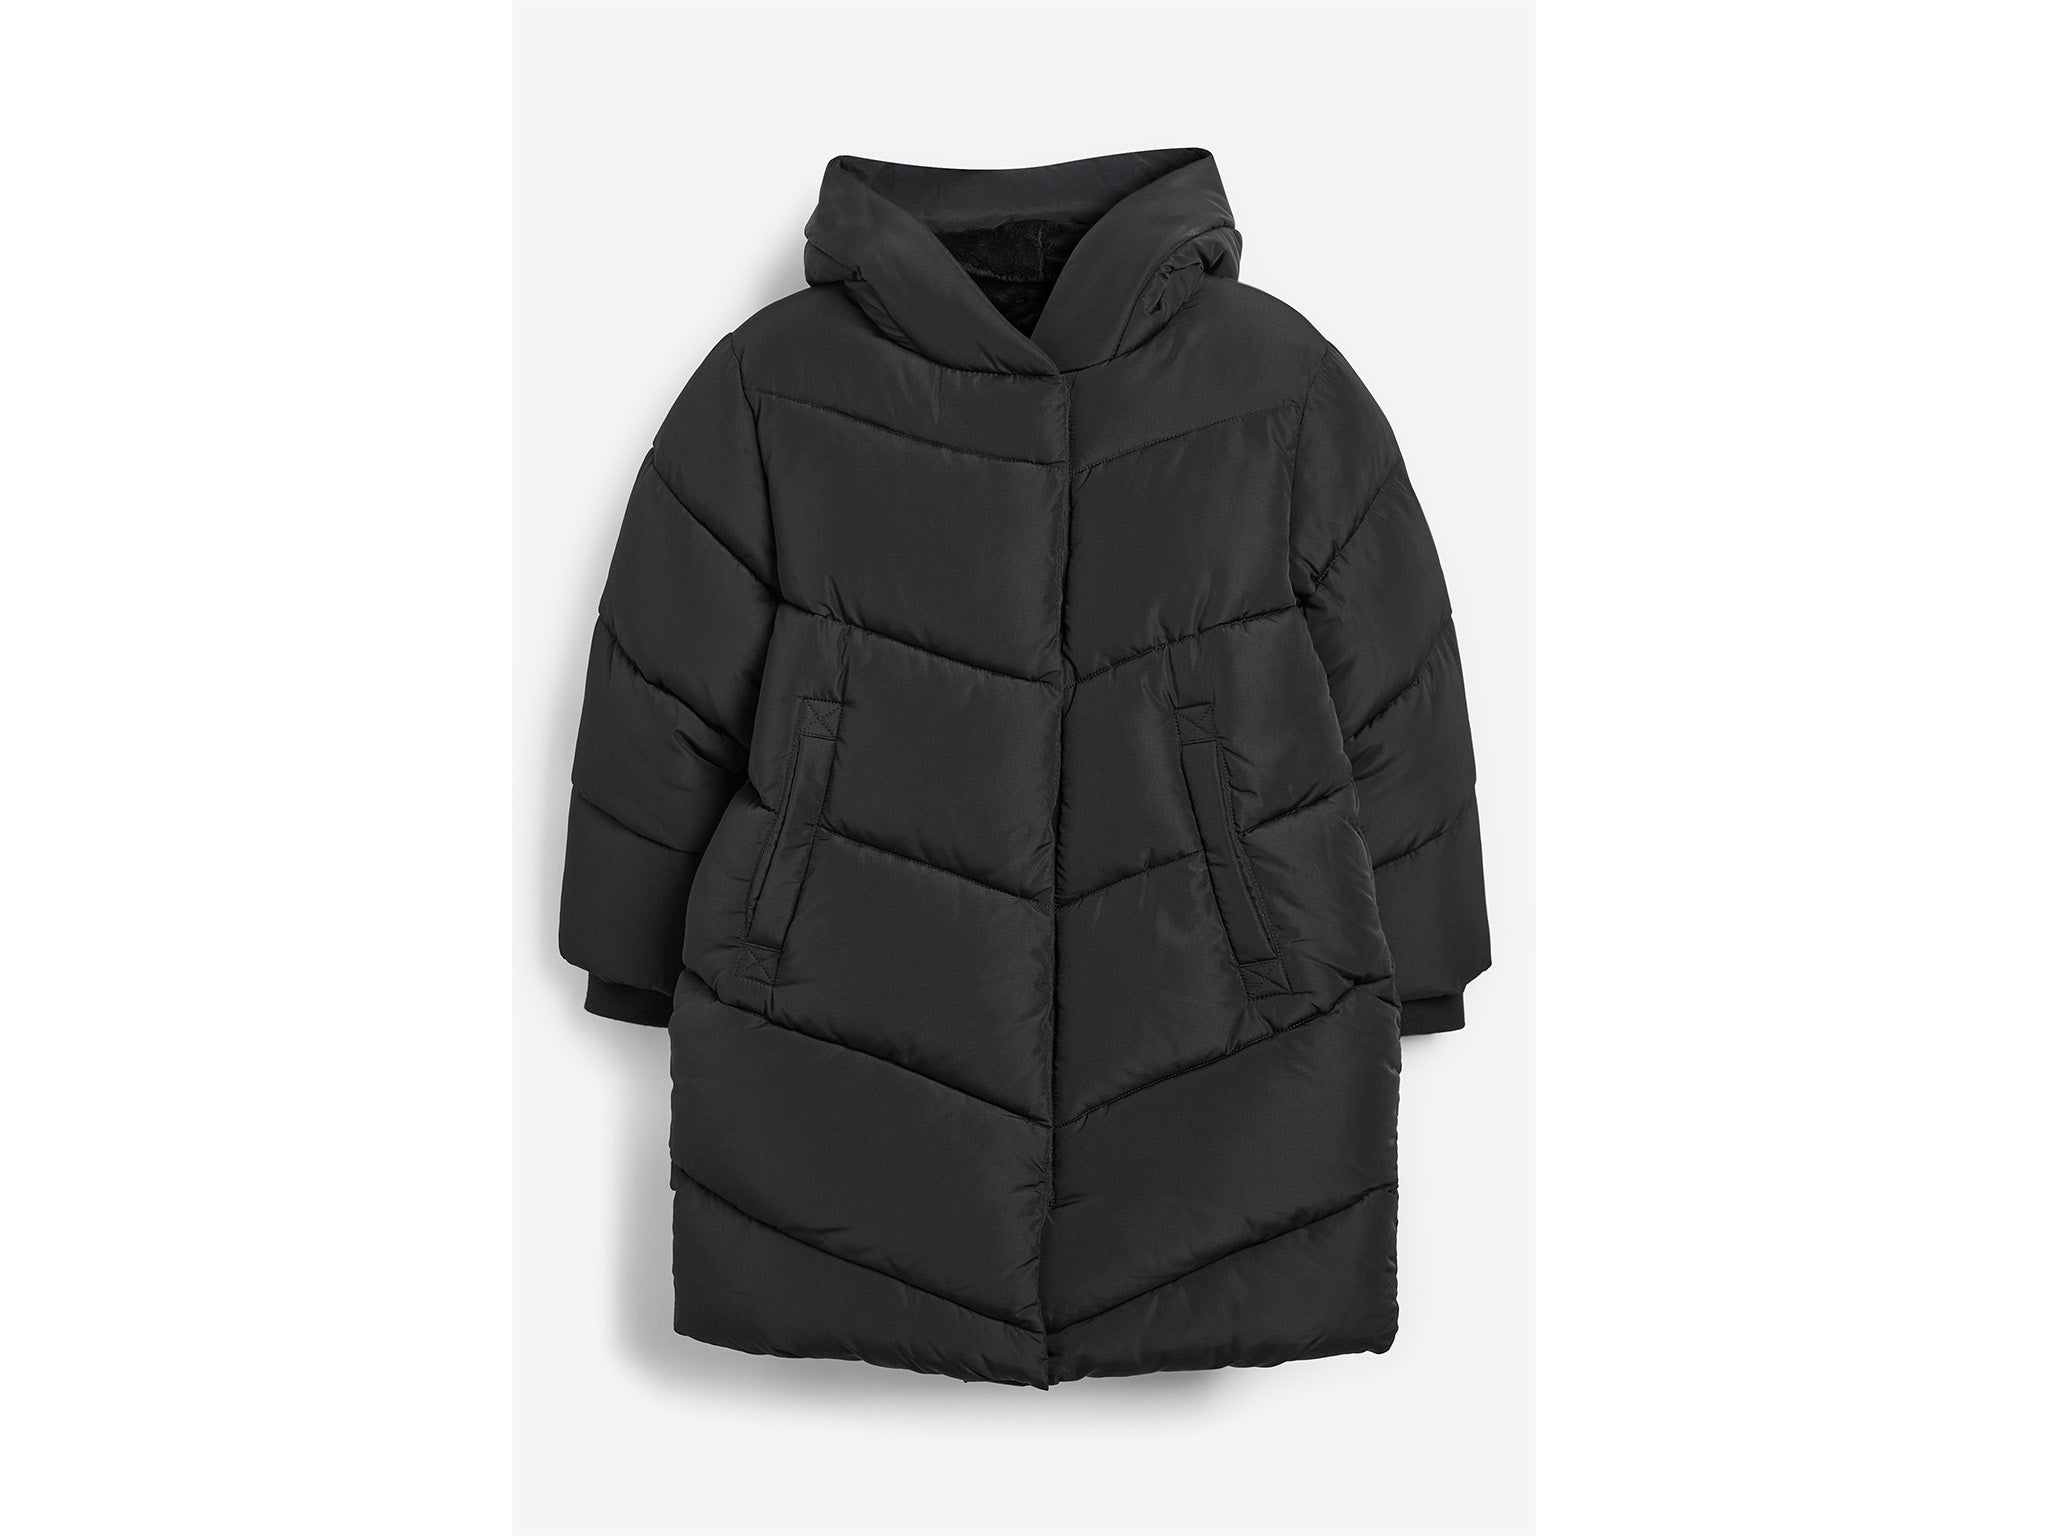 Best school coats 2023: Duffle coats, parkas and jackets for boys and girls